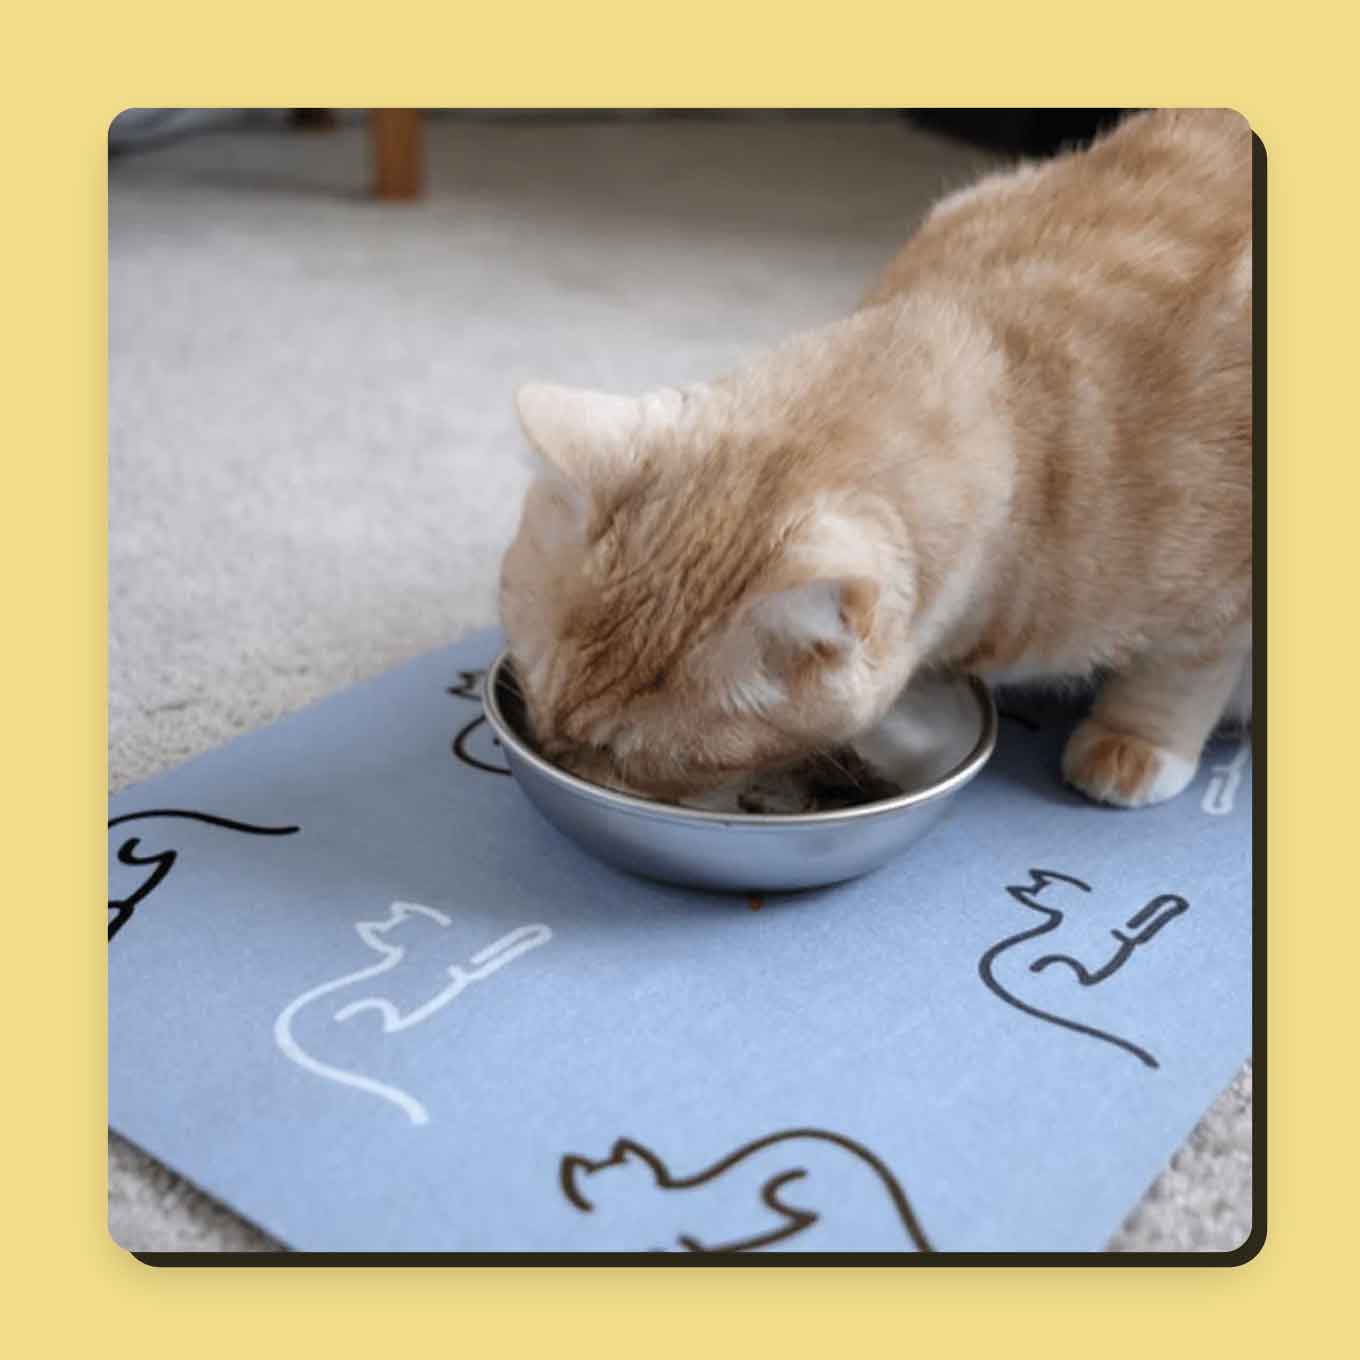 A cat eats from a bowl on top of a blue mat